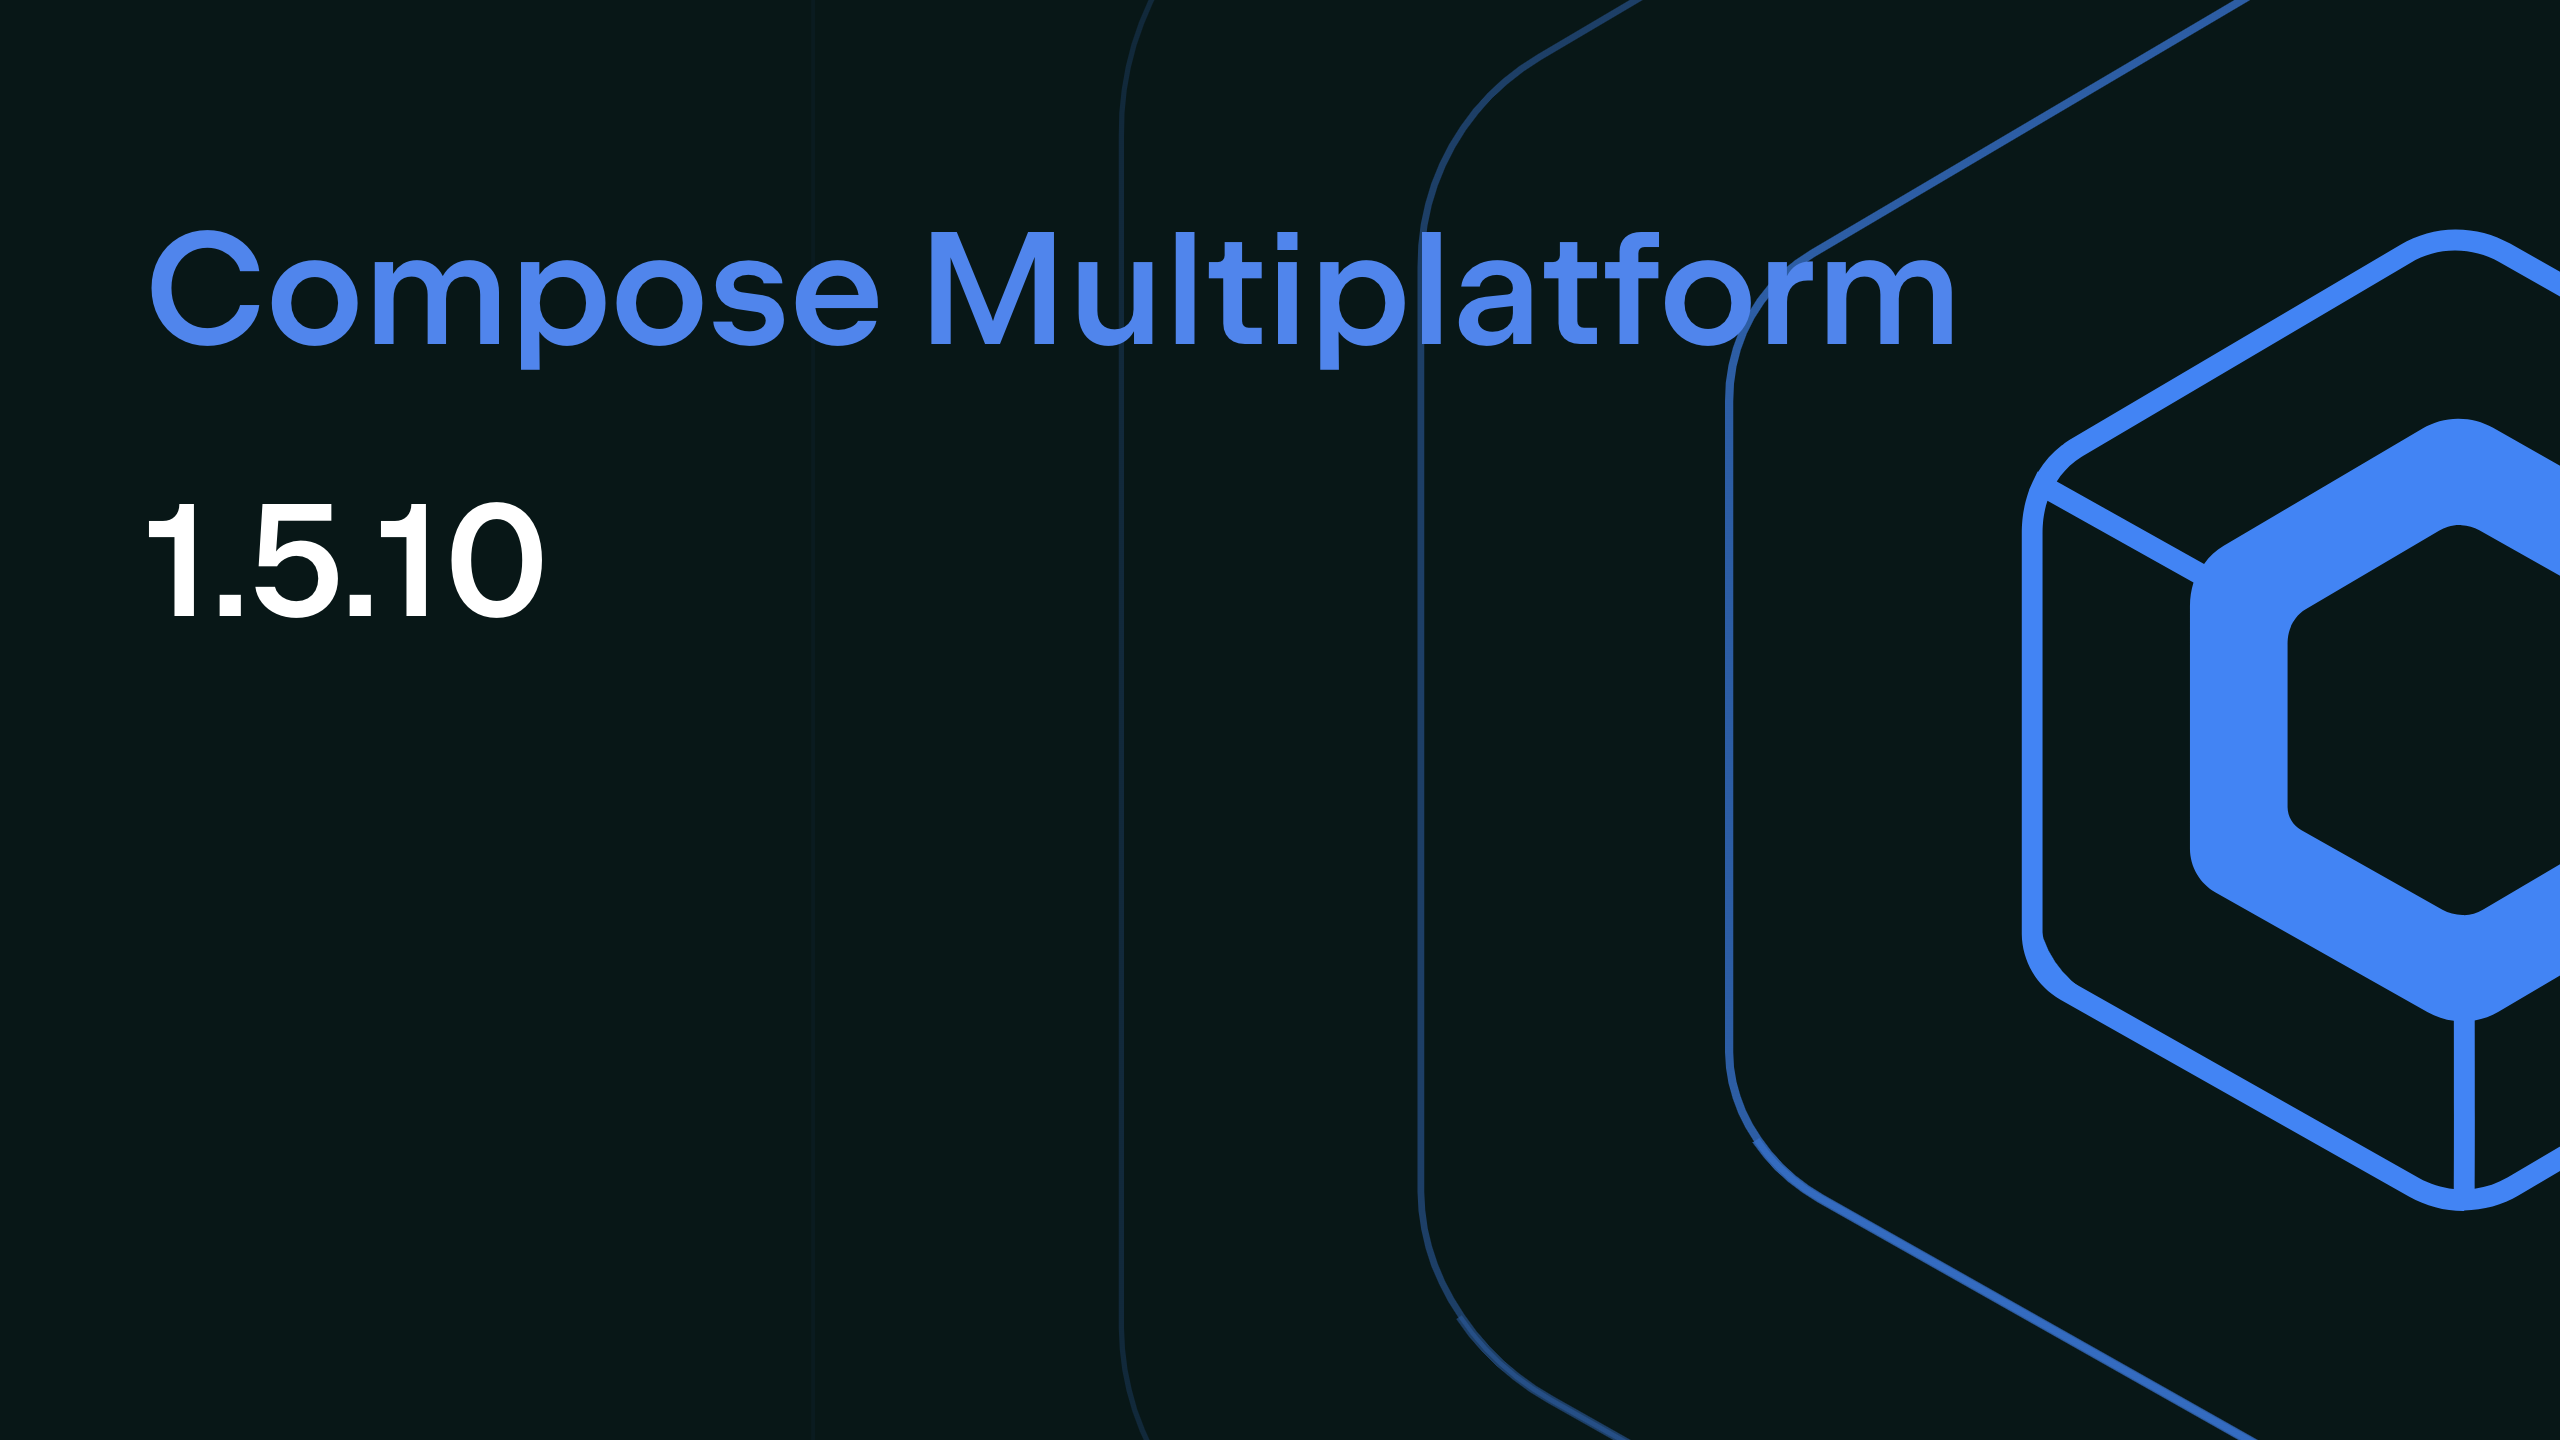 Compose Multiplatform 1.5.10 – The Perfect Time To Get Started